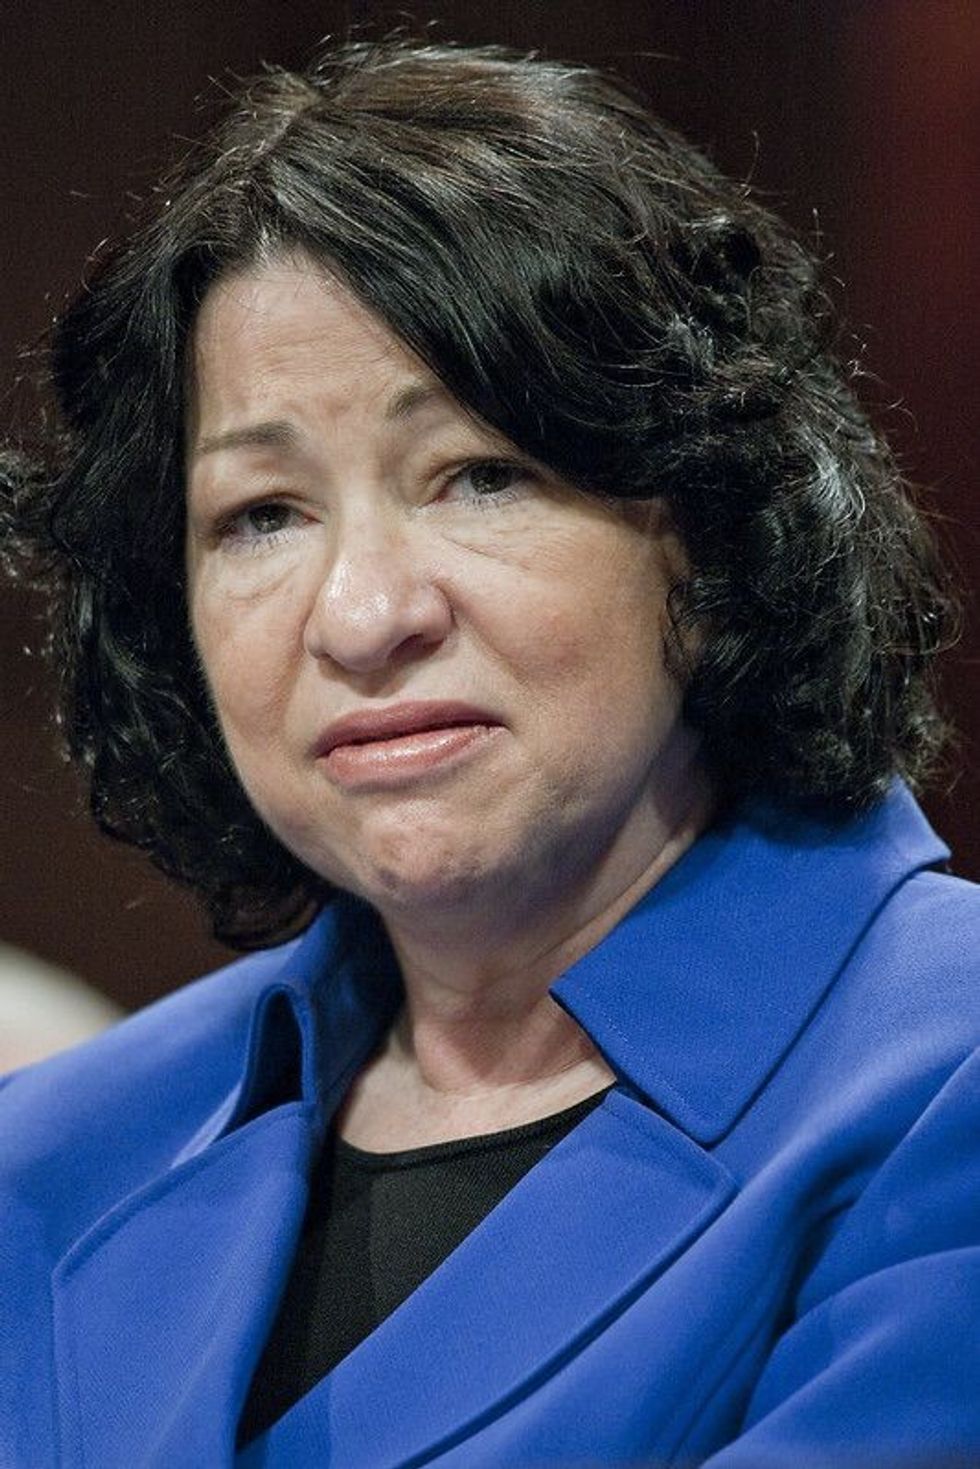 Sonia Sotomayor is an Associate Justice of the US Supreme Court, appointed by President Barack Obama in 2009.